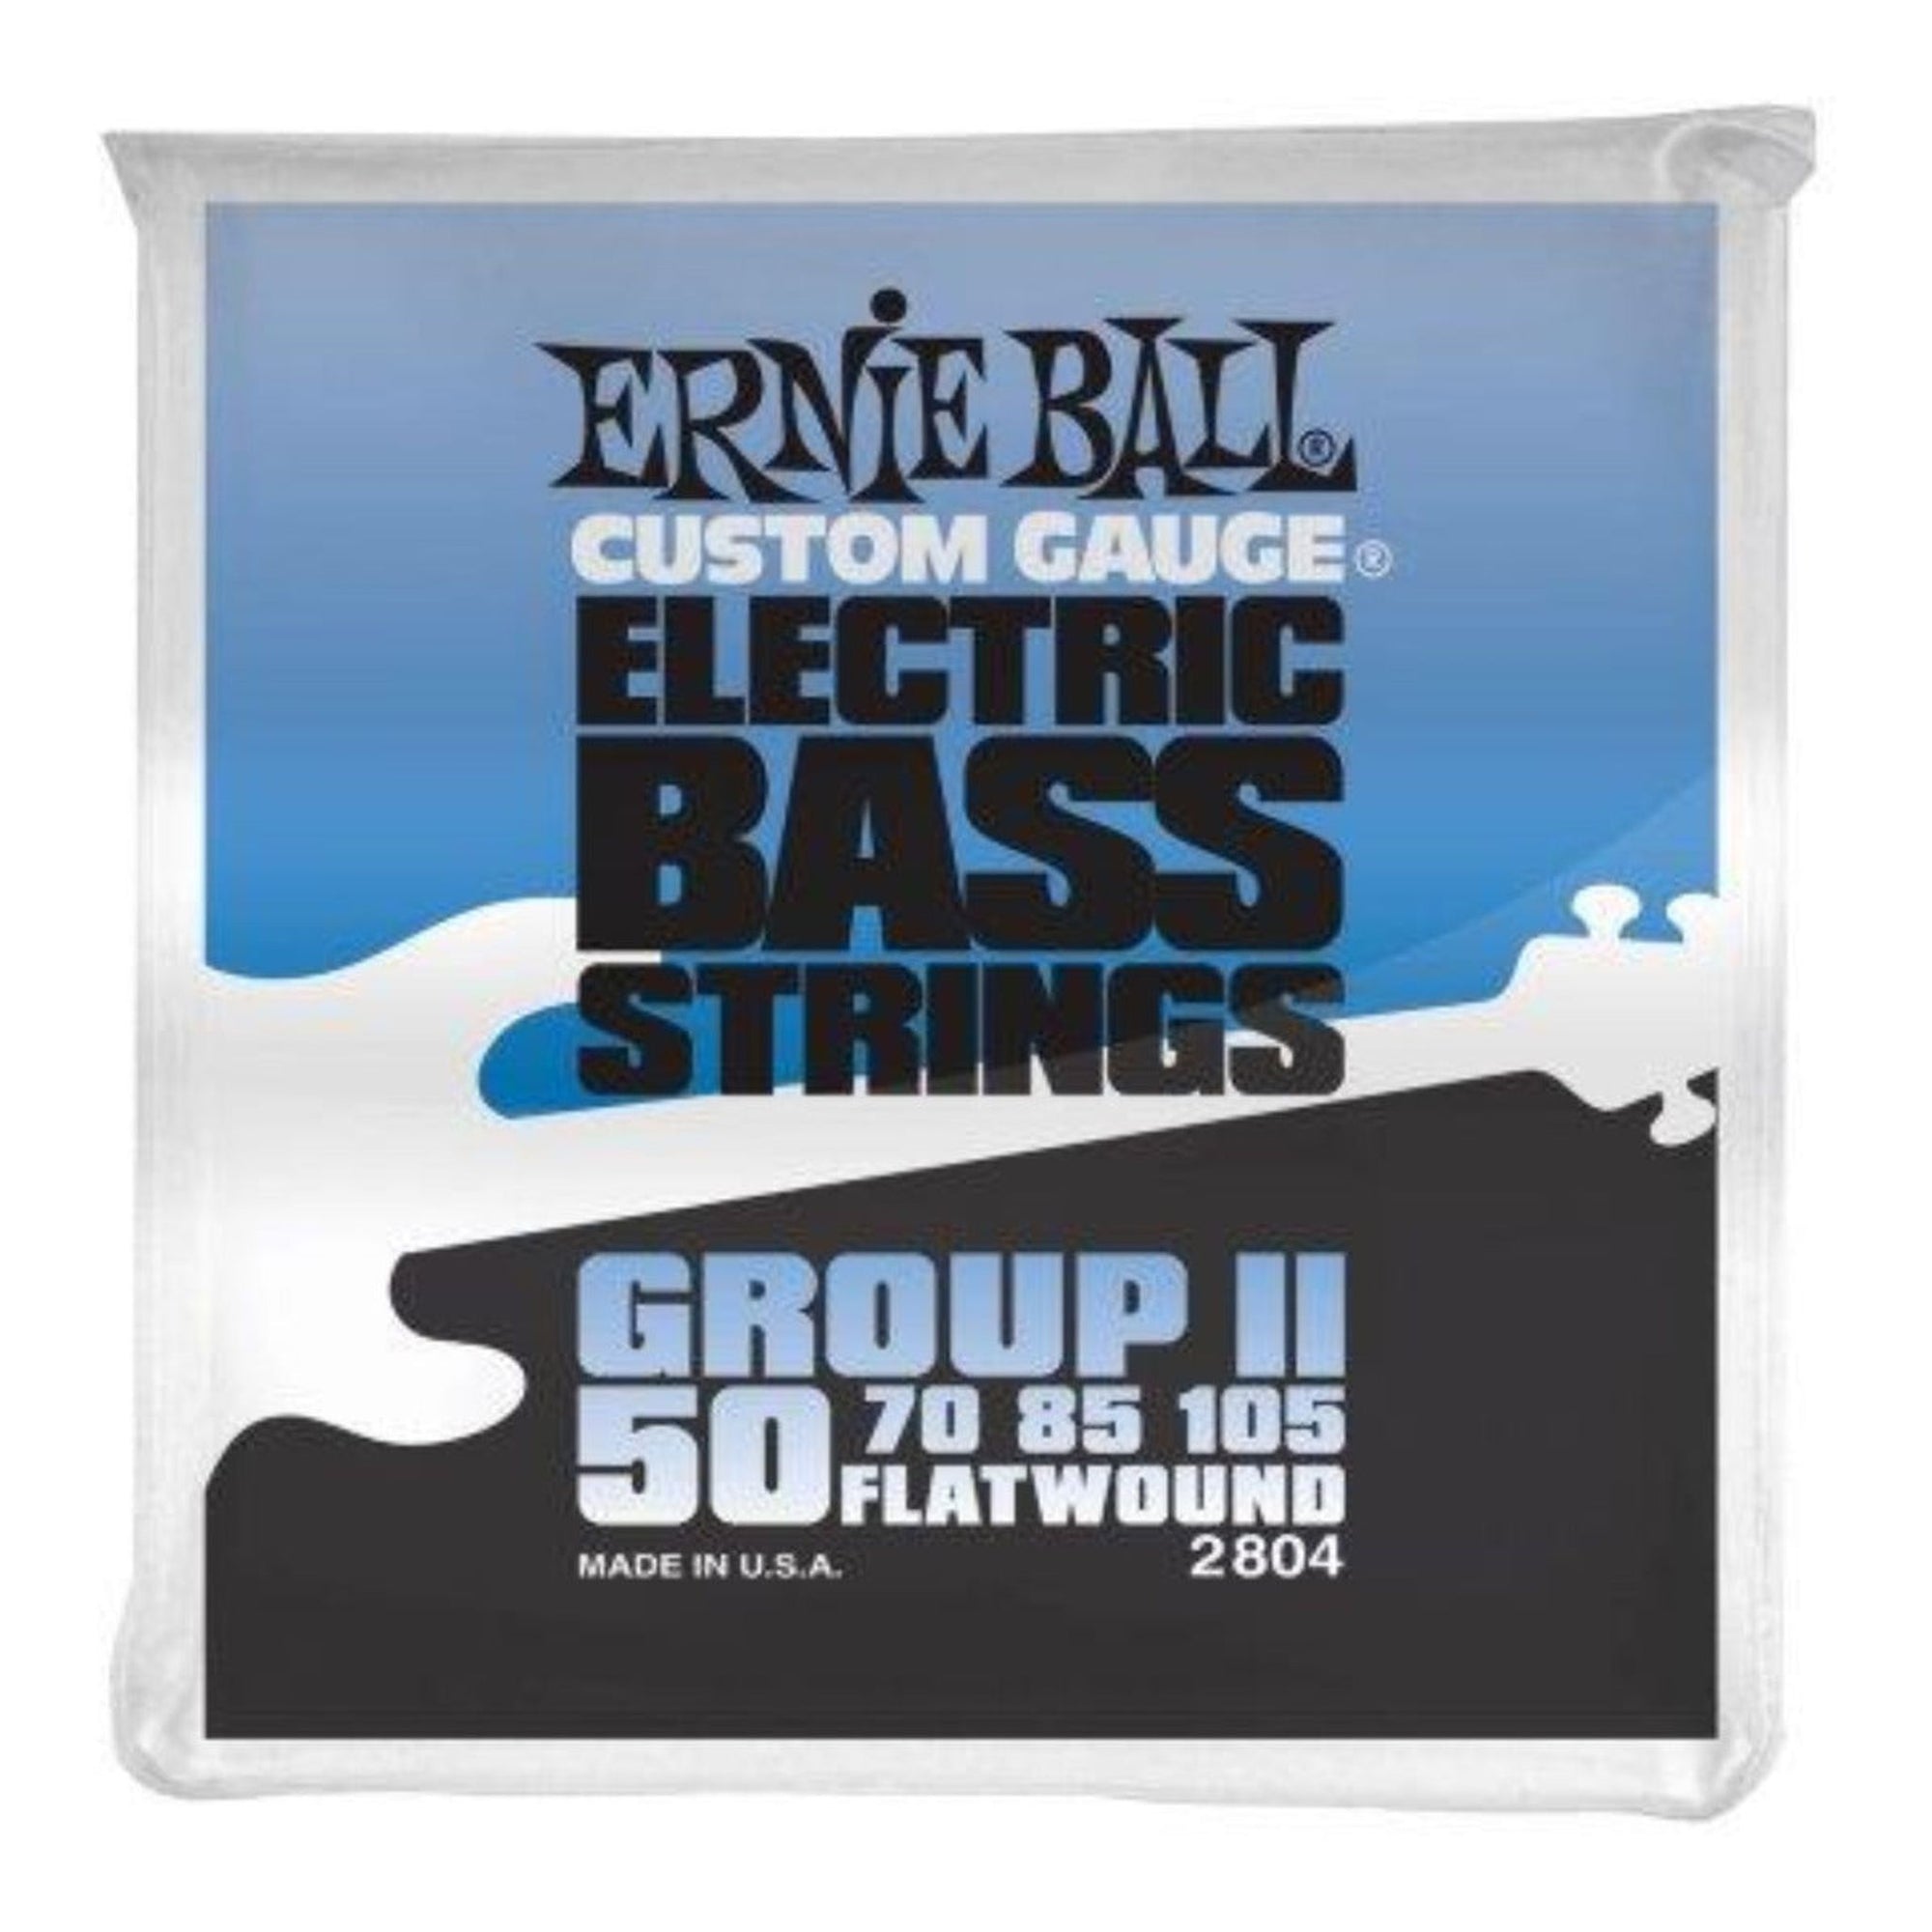 Ernie Ball Flatwound Electric Bass Strings use flat stainless steel wire wrapped around a hex shaped tin plated steel core. Provides a smooth feel and mellow sound. 